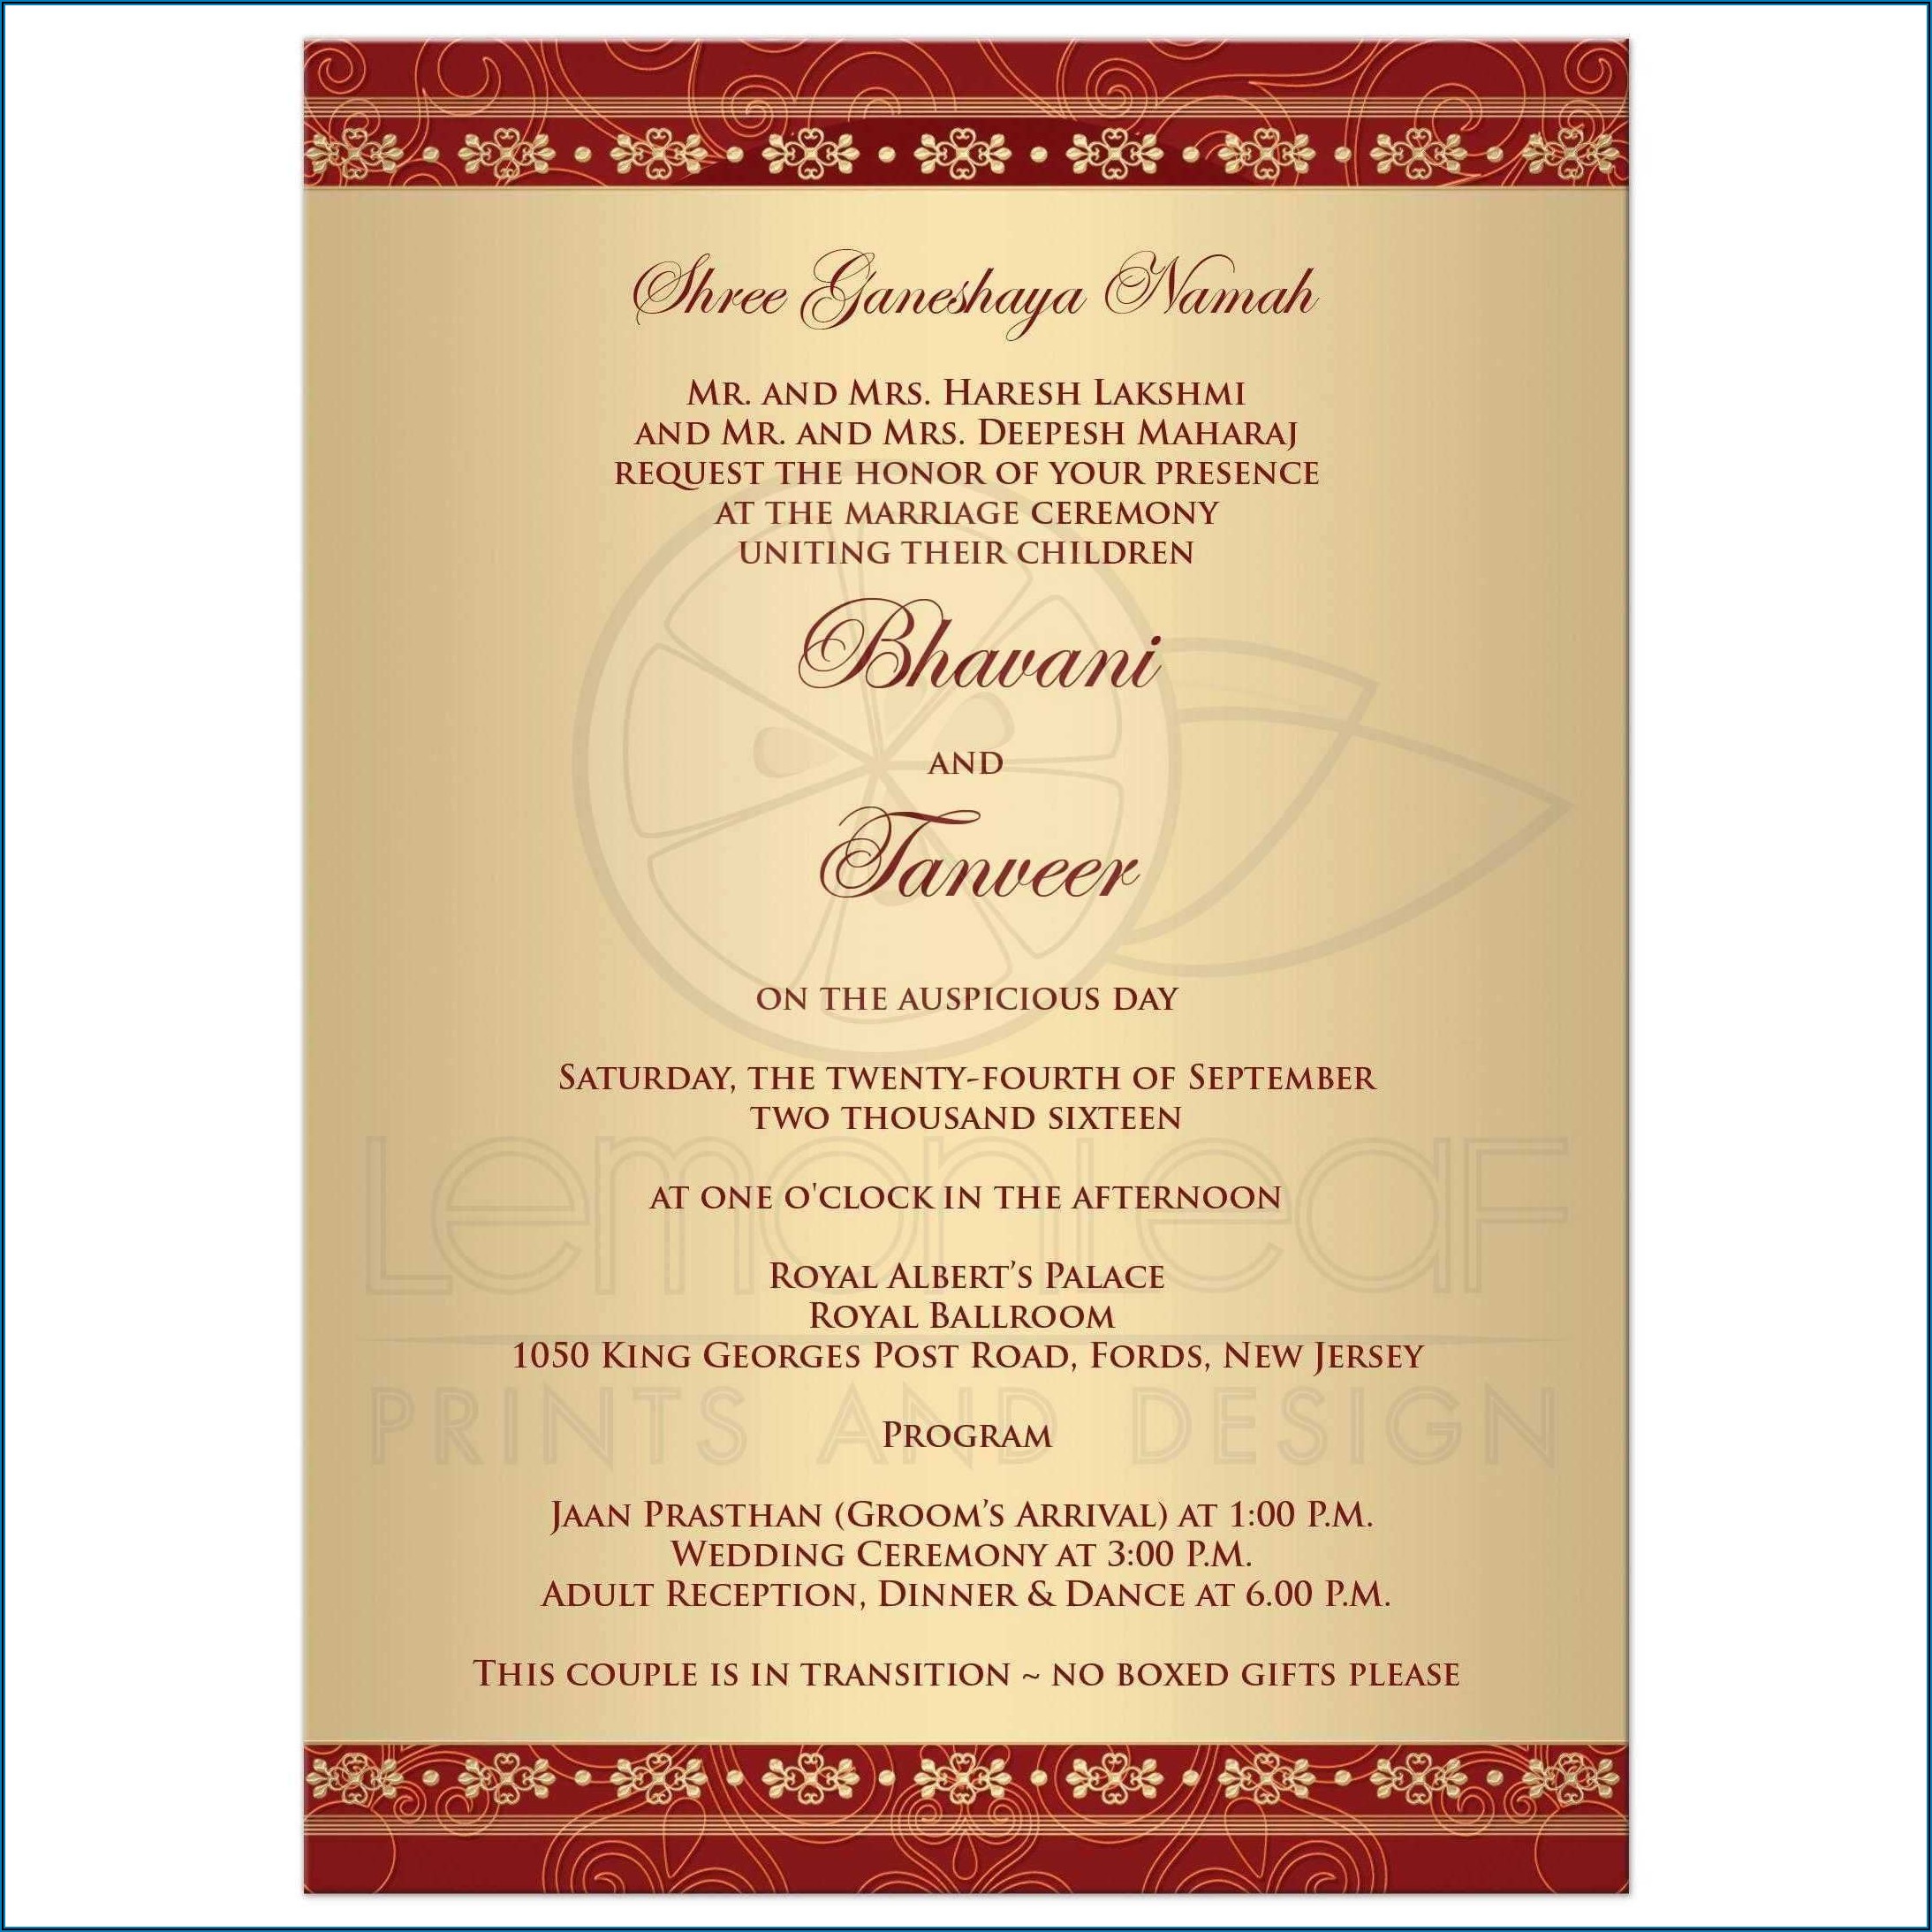 Marriage Invitation Card Format For Friends